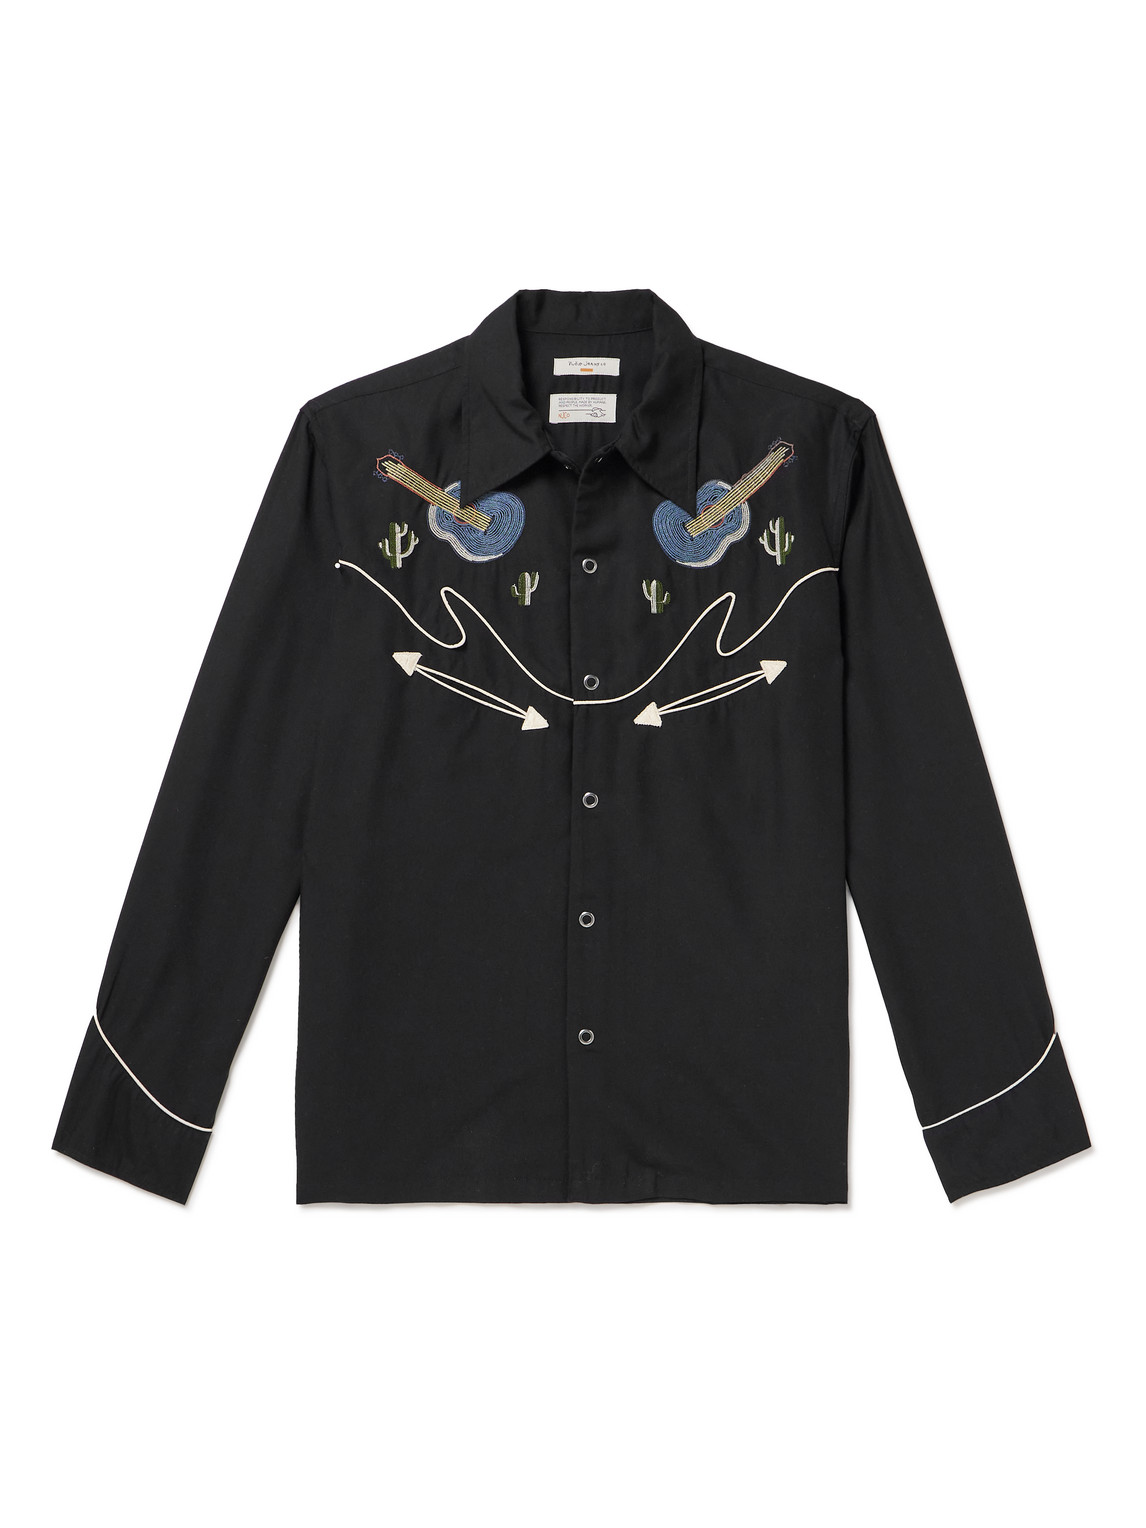 NUDIE JEANS GONZO EMBROIDERED LYOCELL WESTERN SHIRT